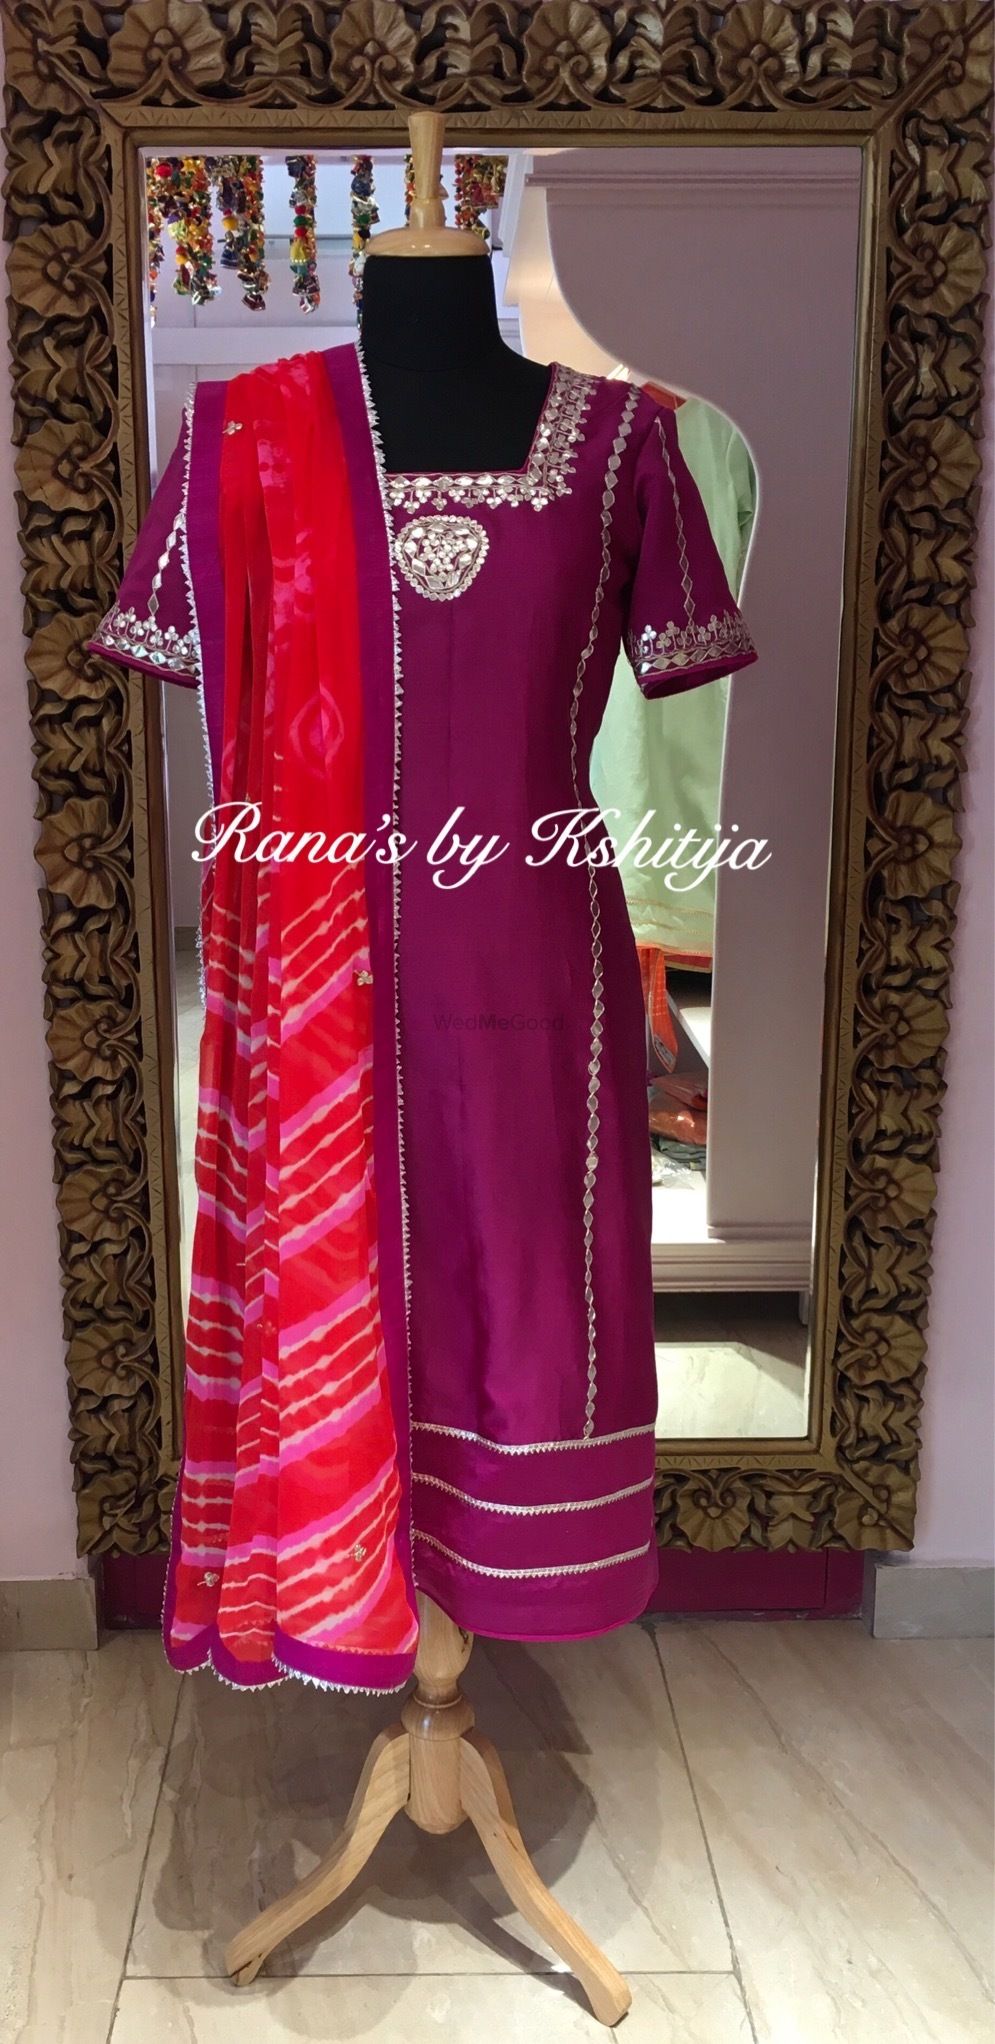 Photo From Designer Range of Gorgeous Handmade Outfits - By RANA'S by Kshitija